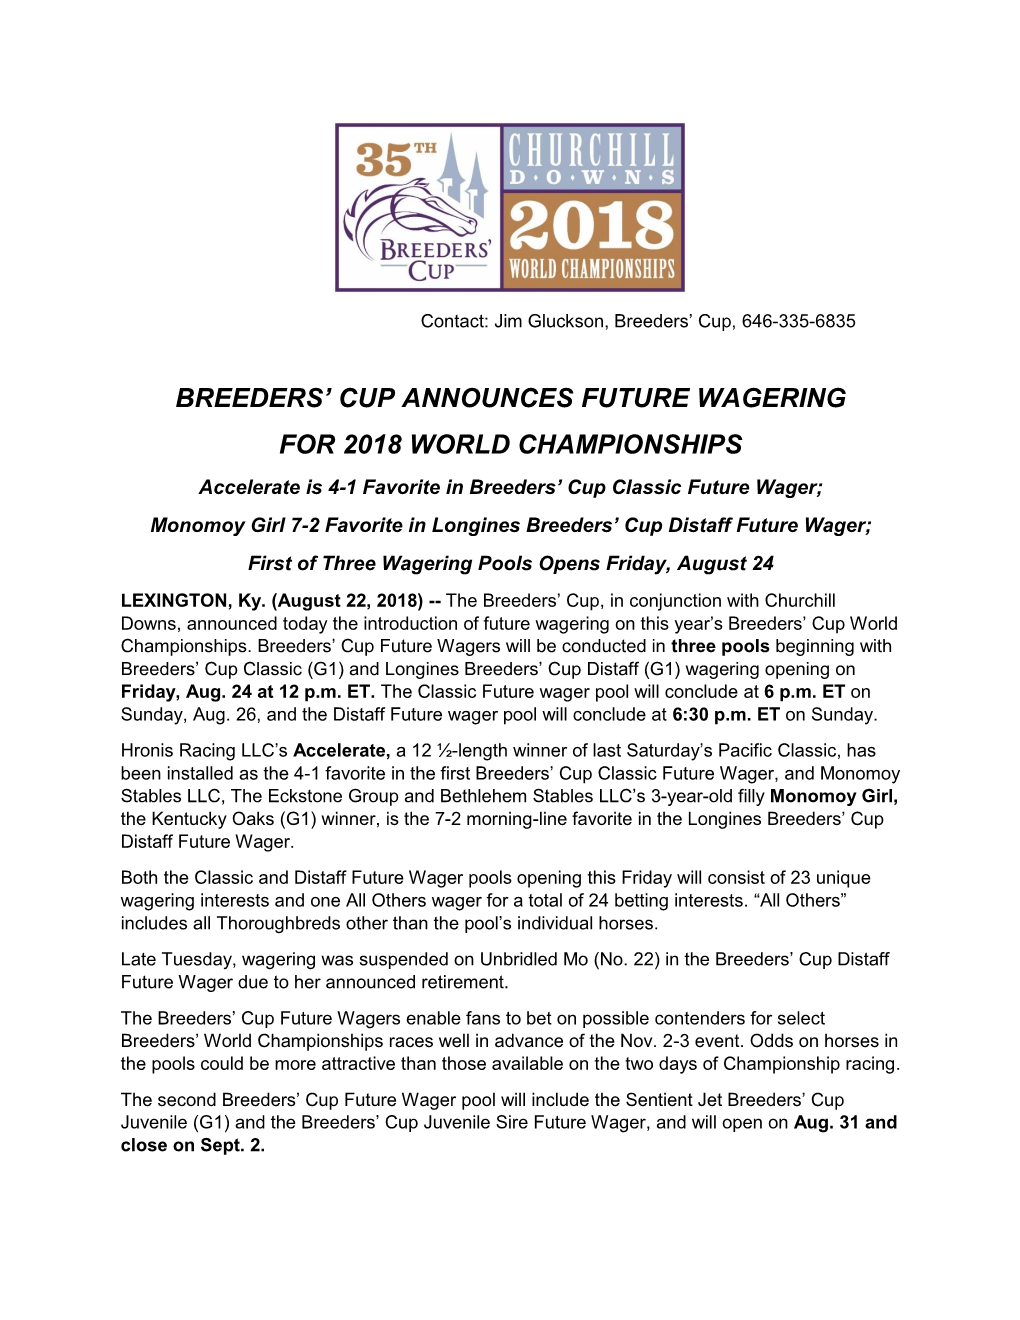 Breeders' Cup Announces Future Wagering for 2018 World